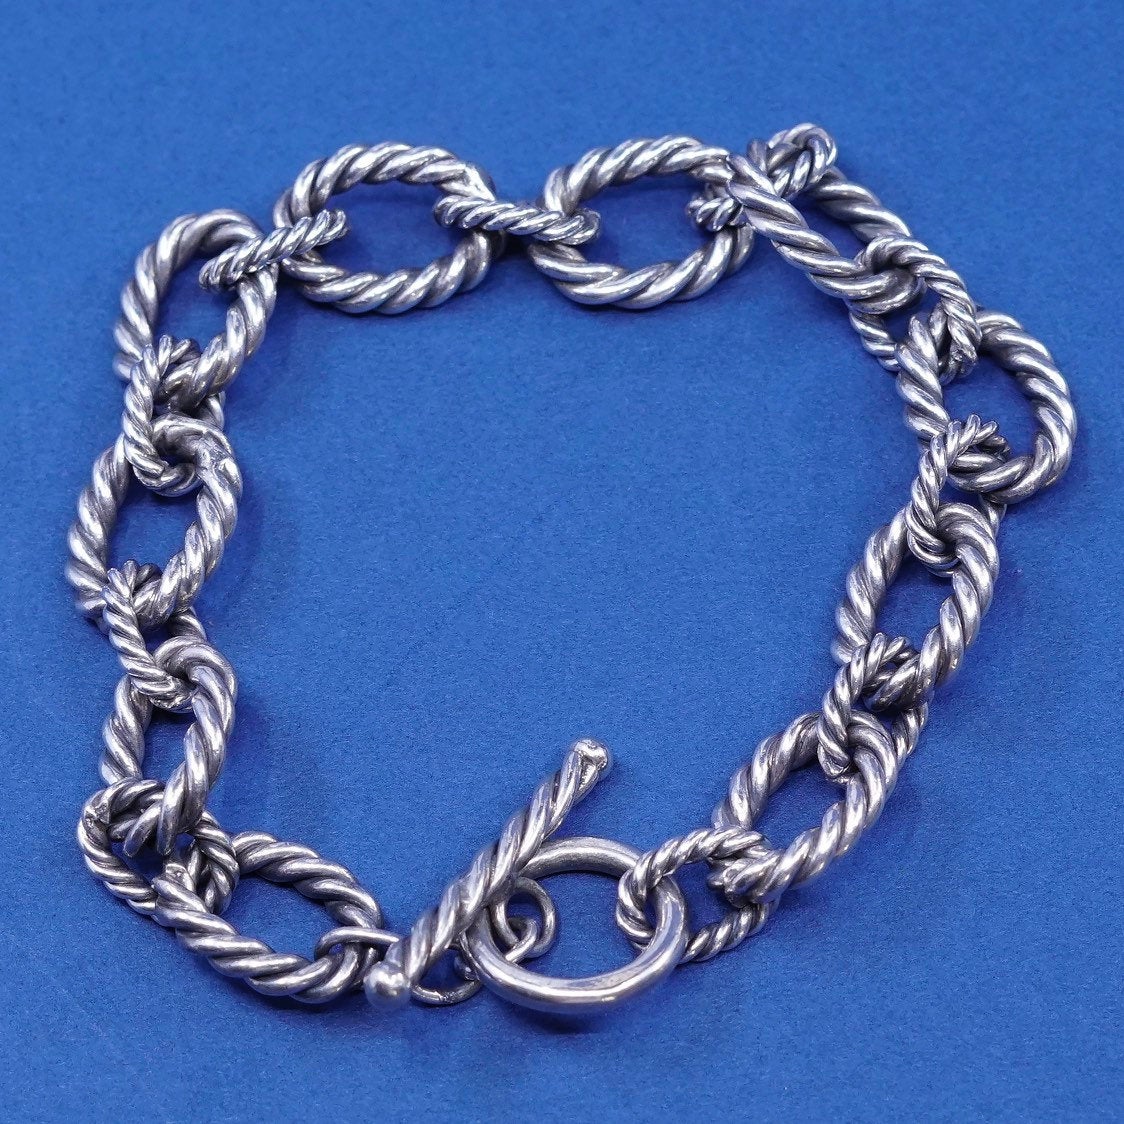 7”, 11mm, vtg Sterling silver handmade bracelet, 925 twisted cable circle chain